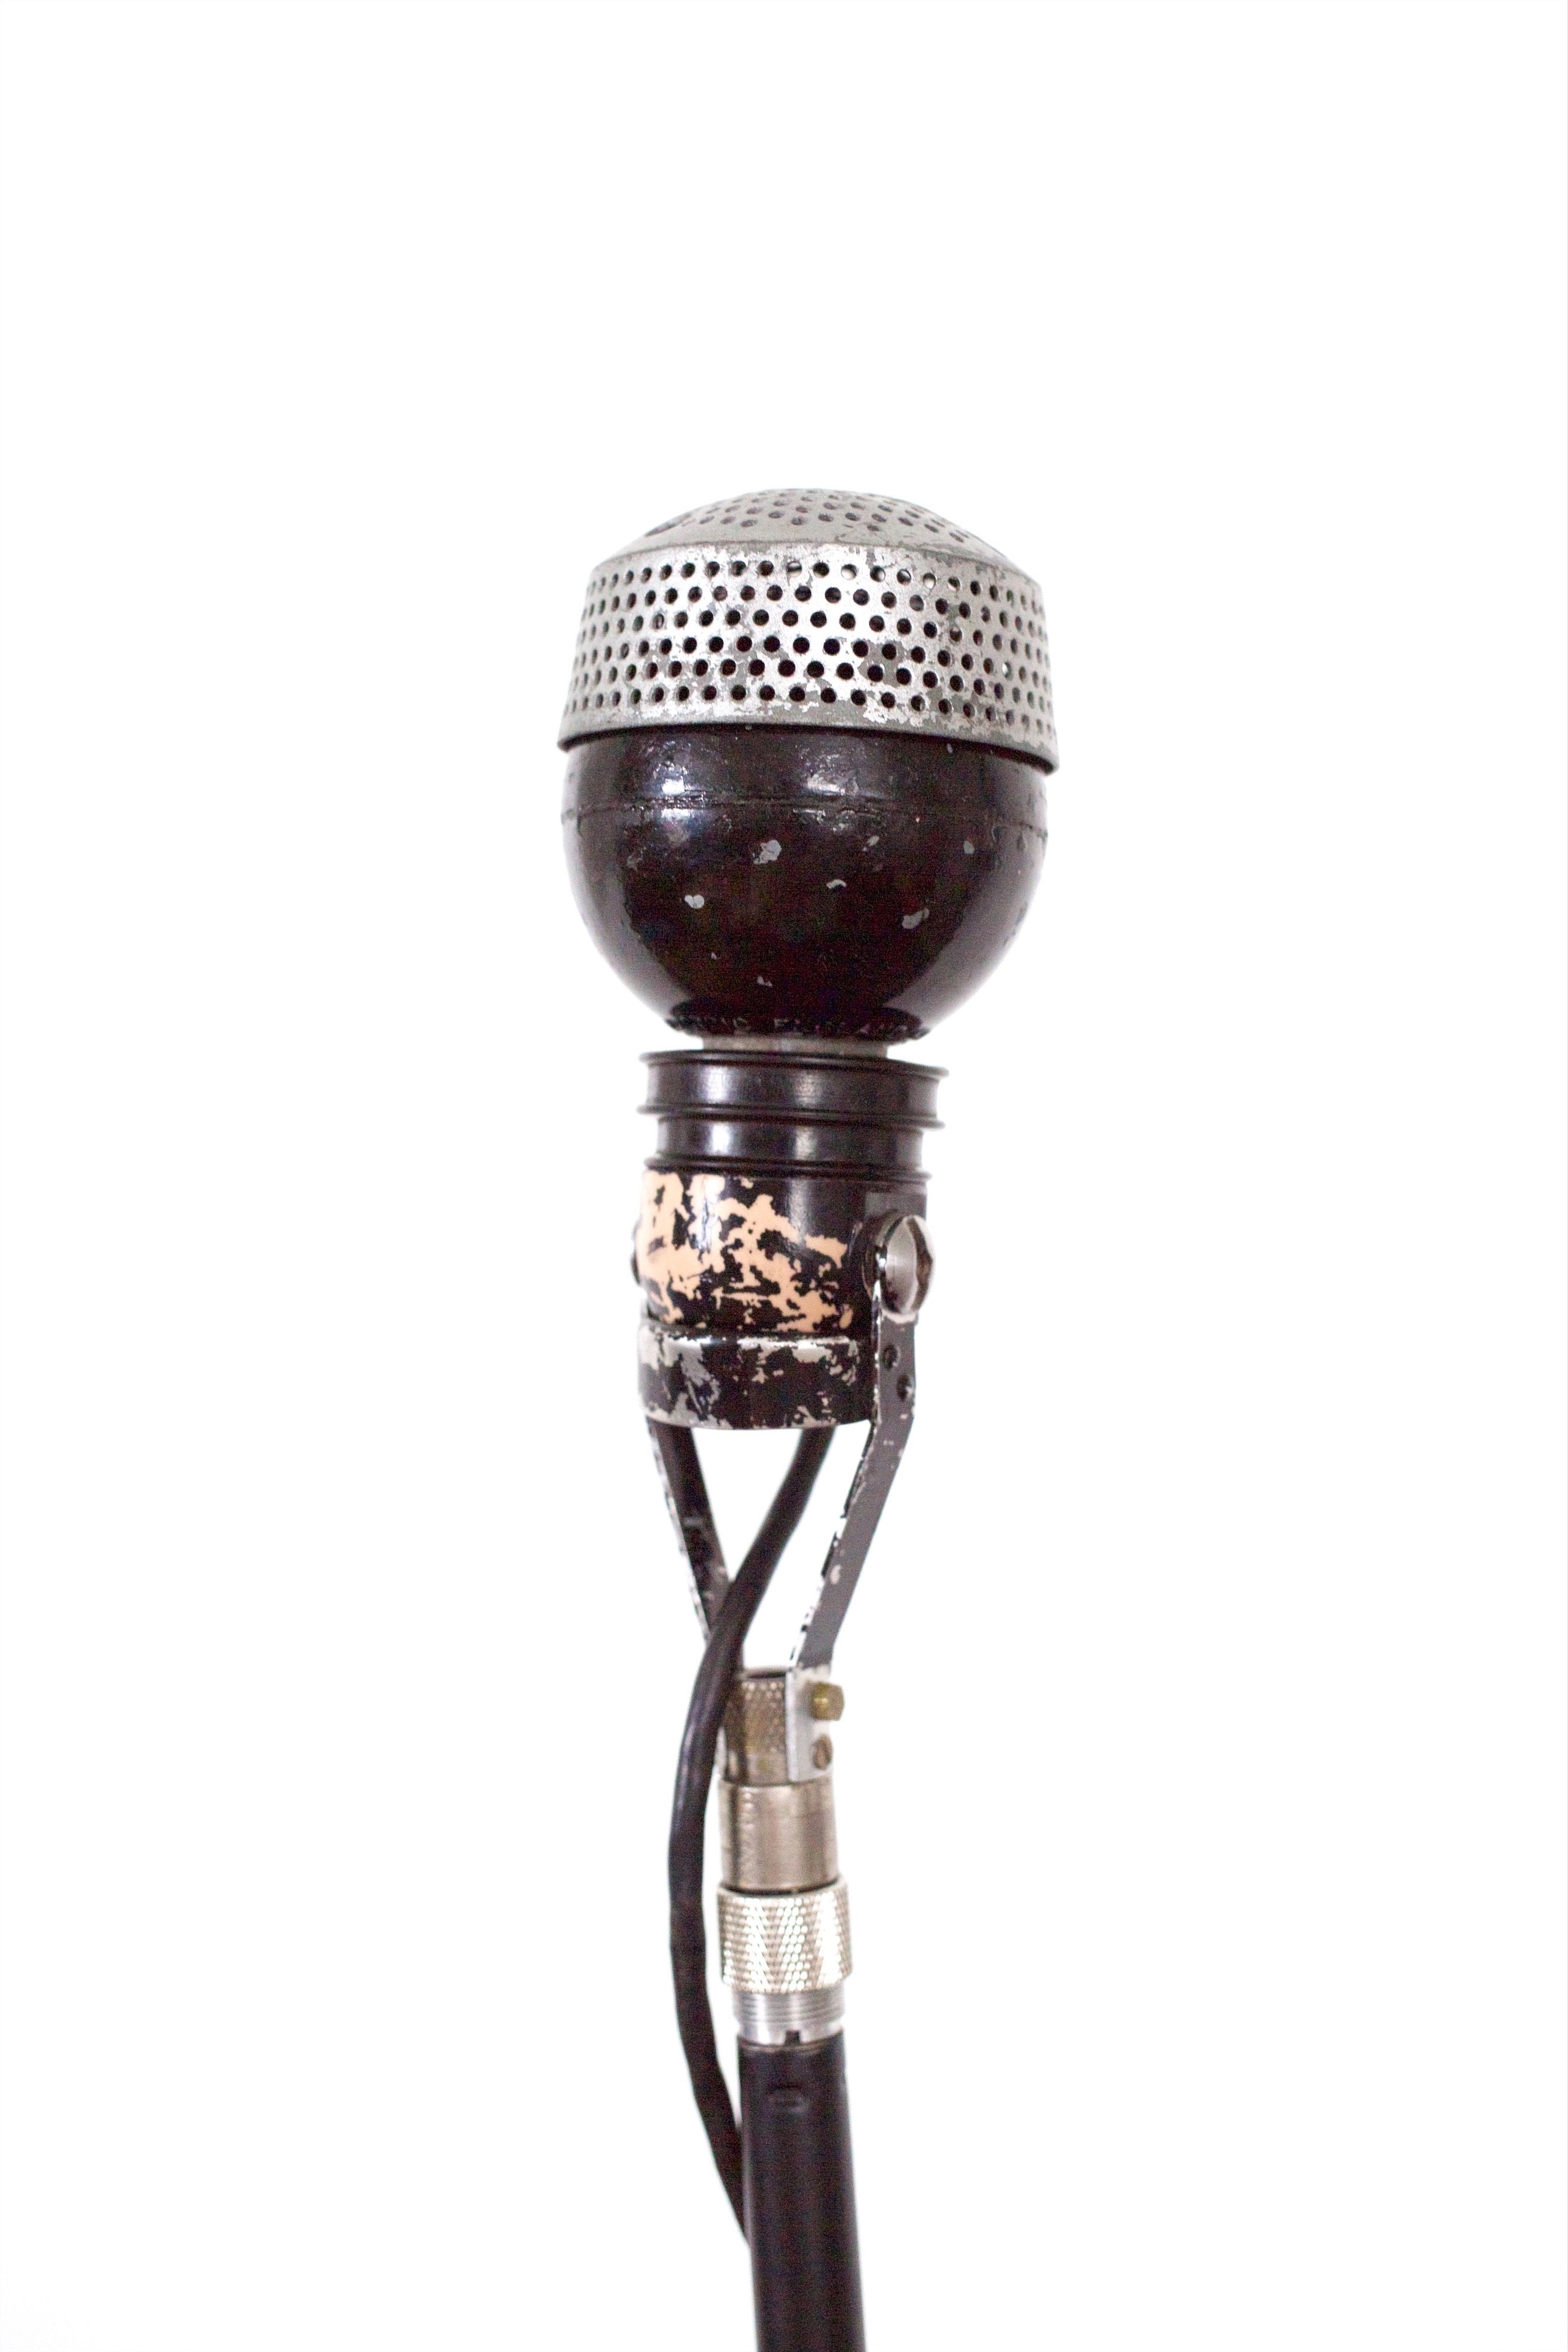 STC 4021C "Ball and Biscuit" Dynamic Microphone